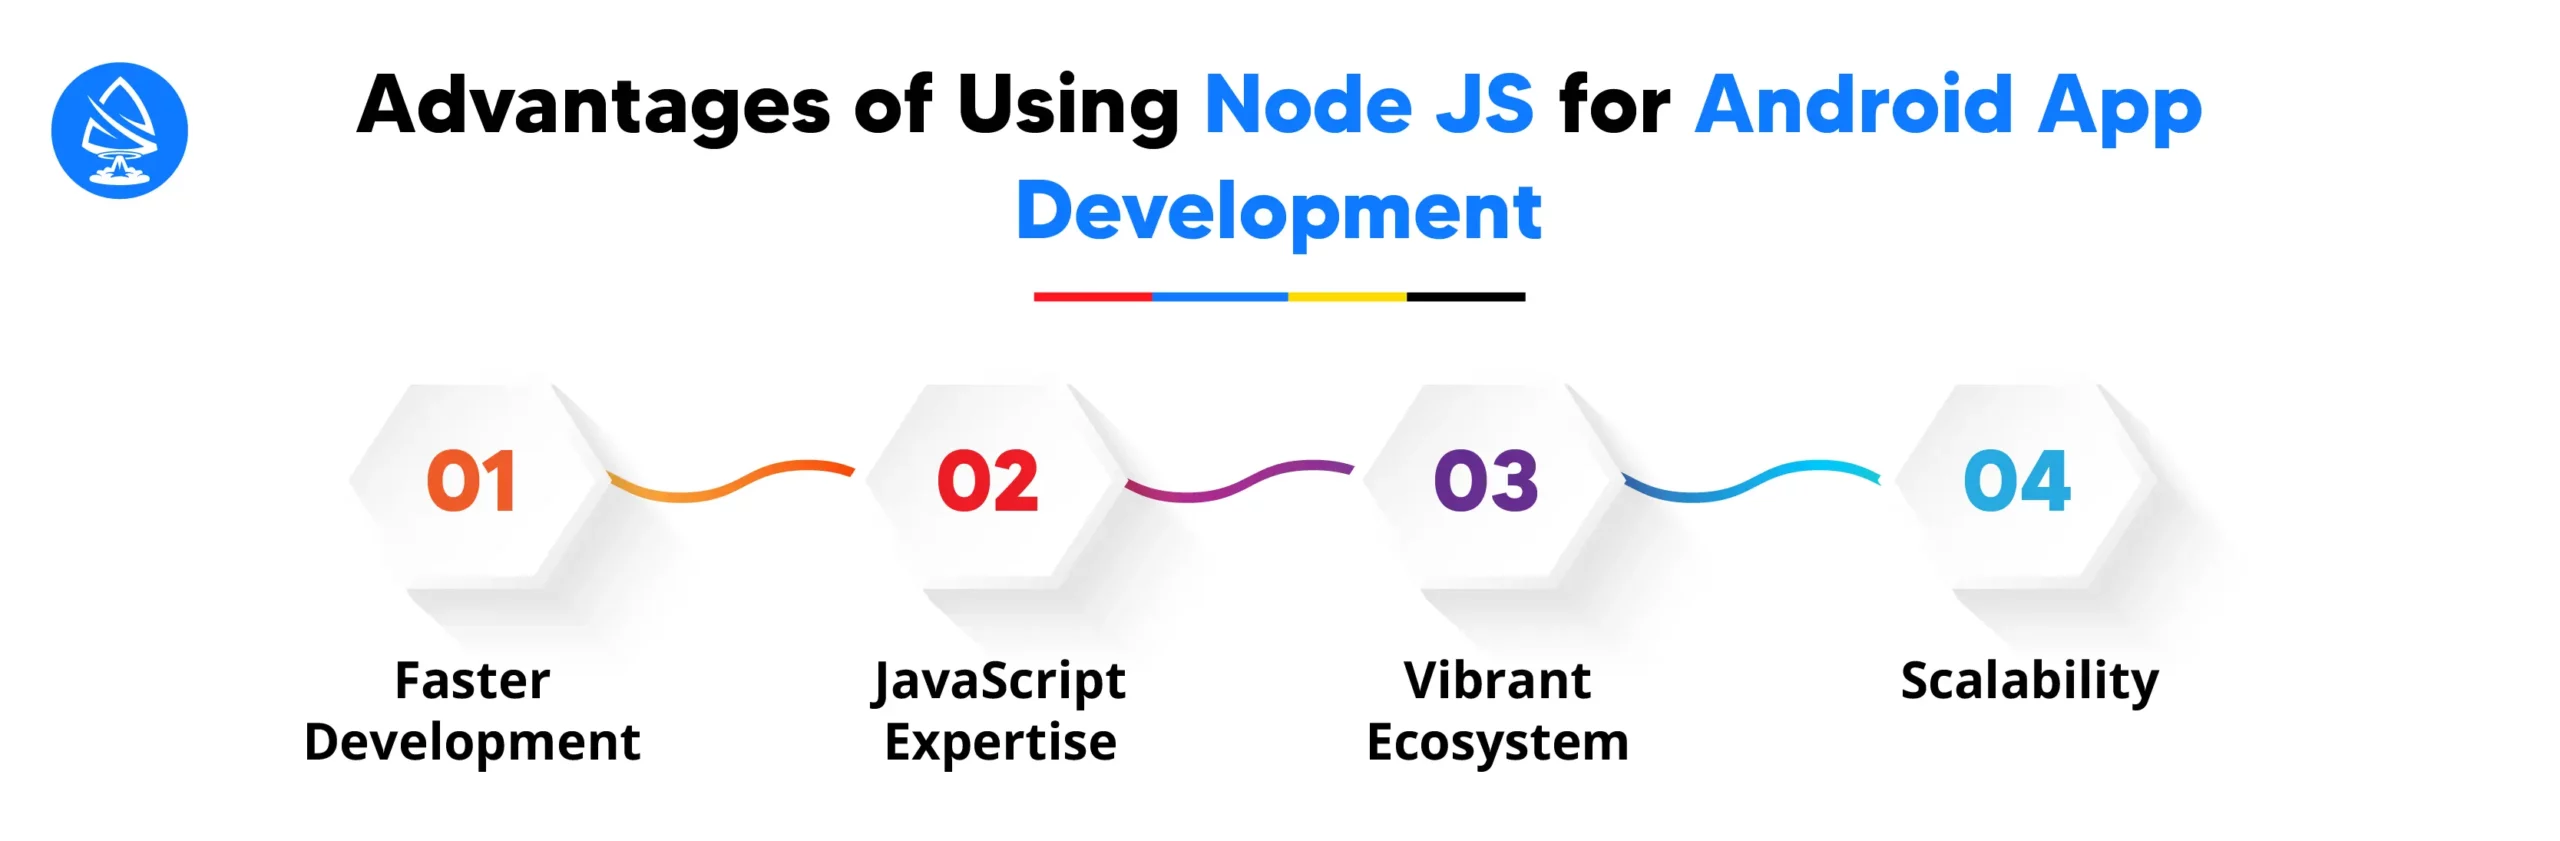 Advantages of Using Node JS for Android App Development